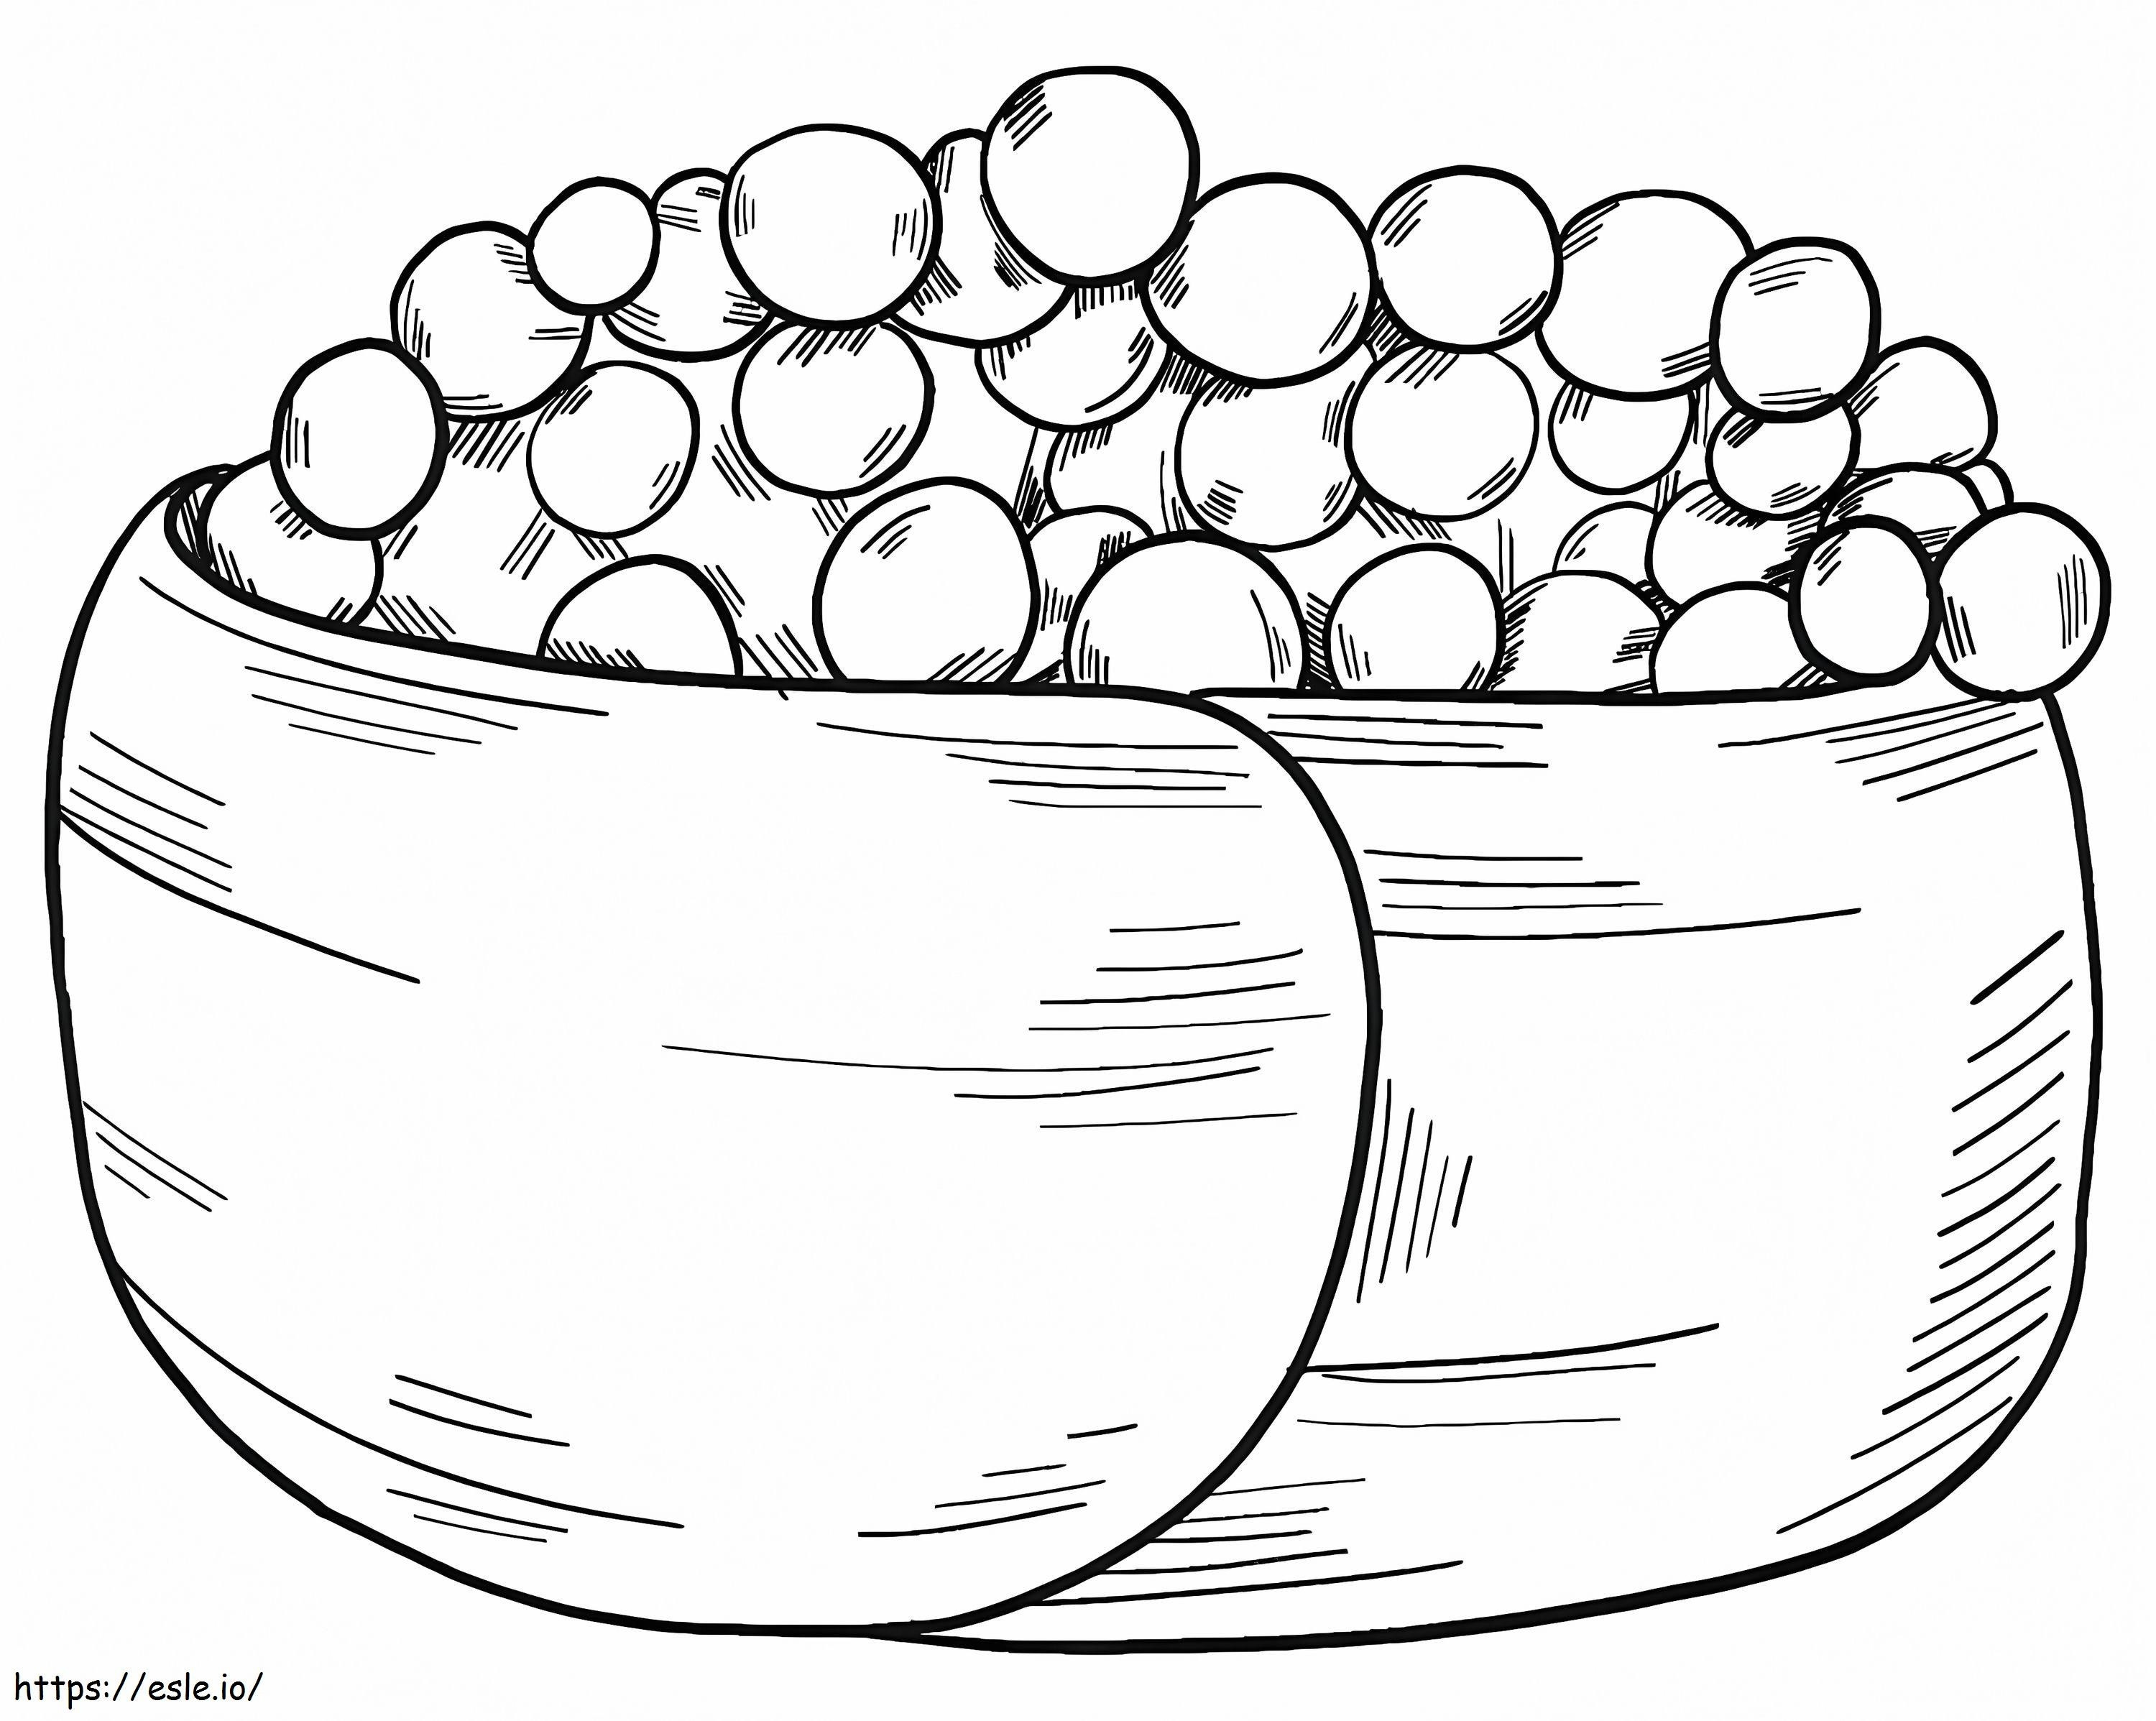 Sushi 9 coloring page